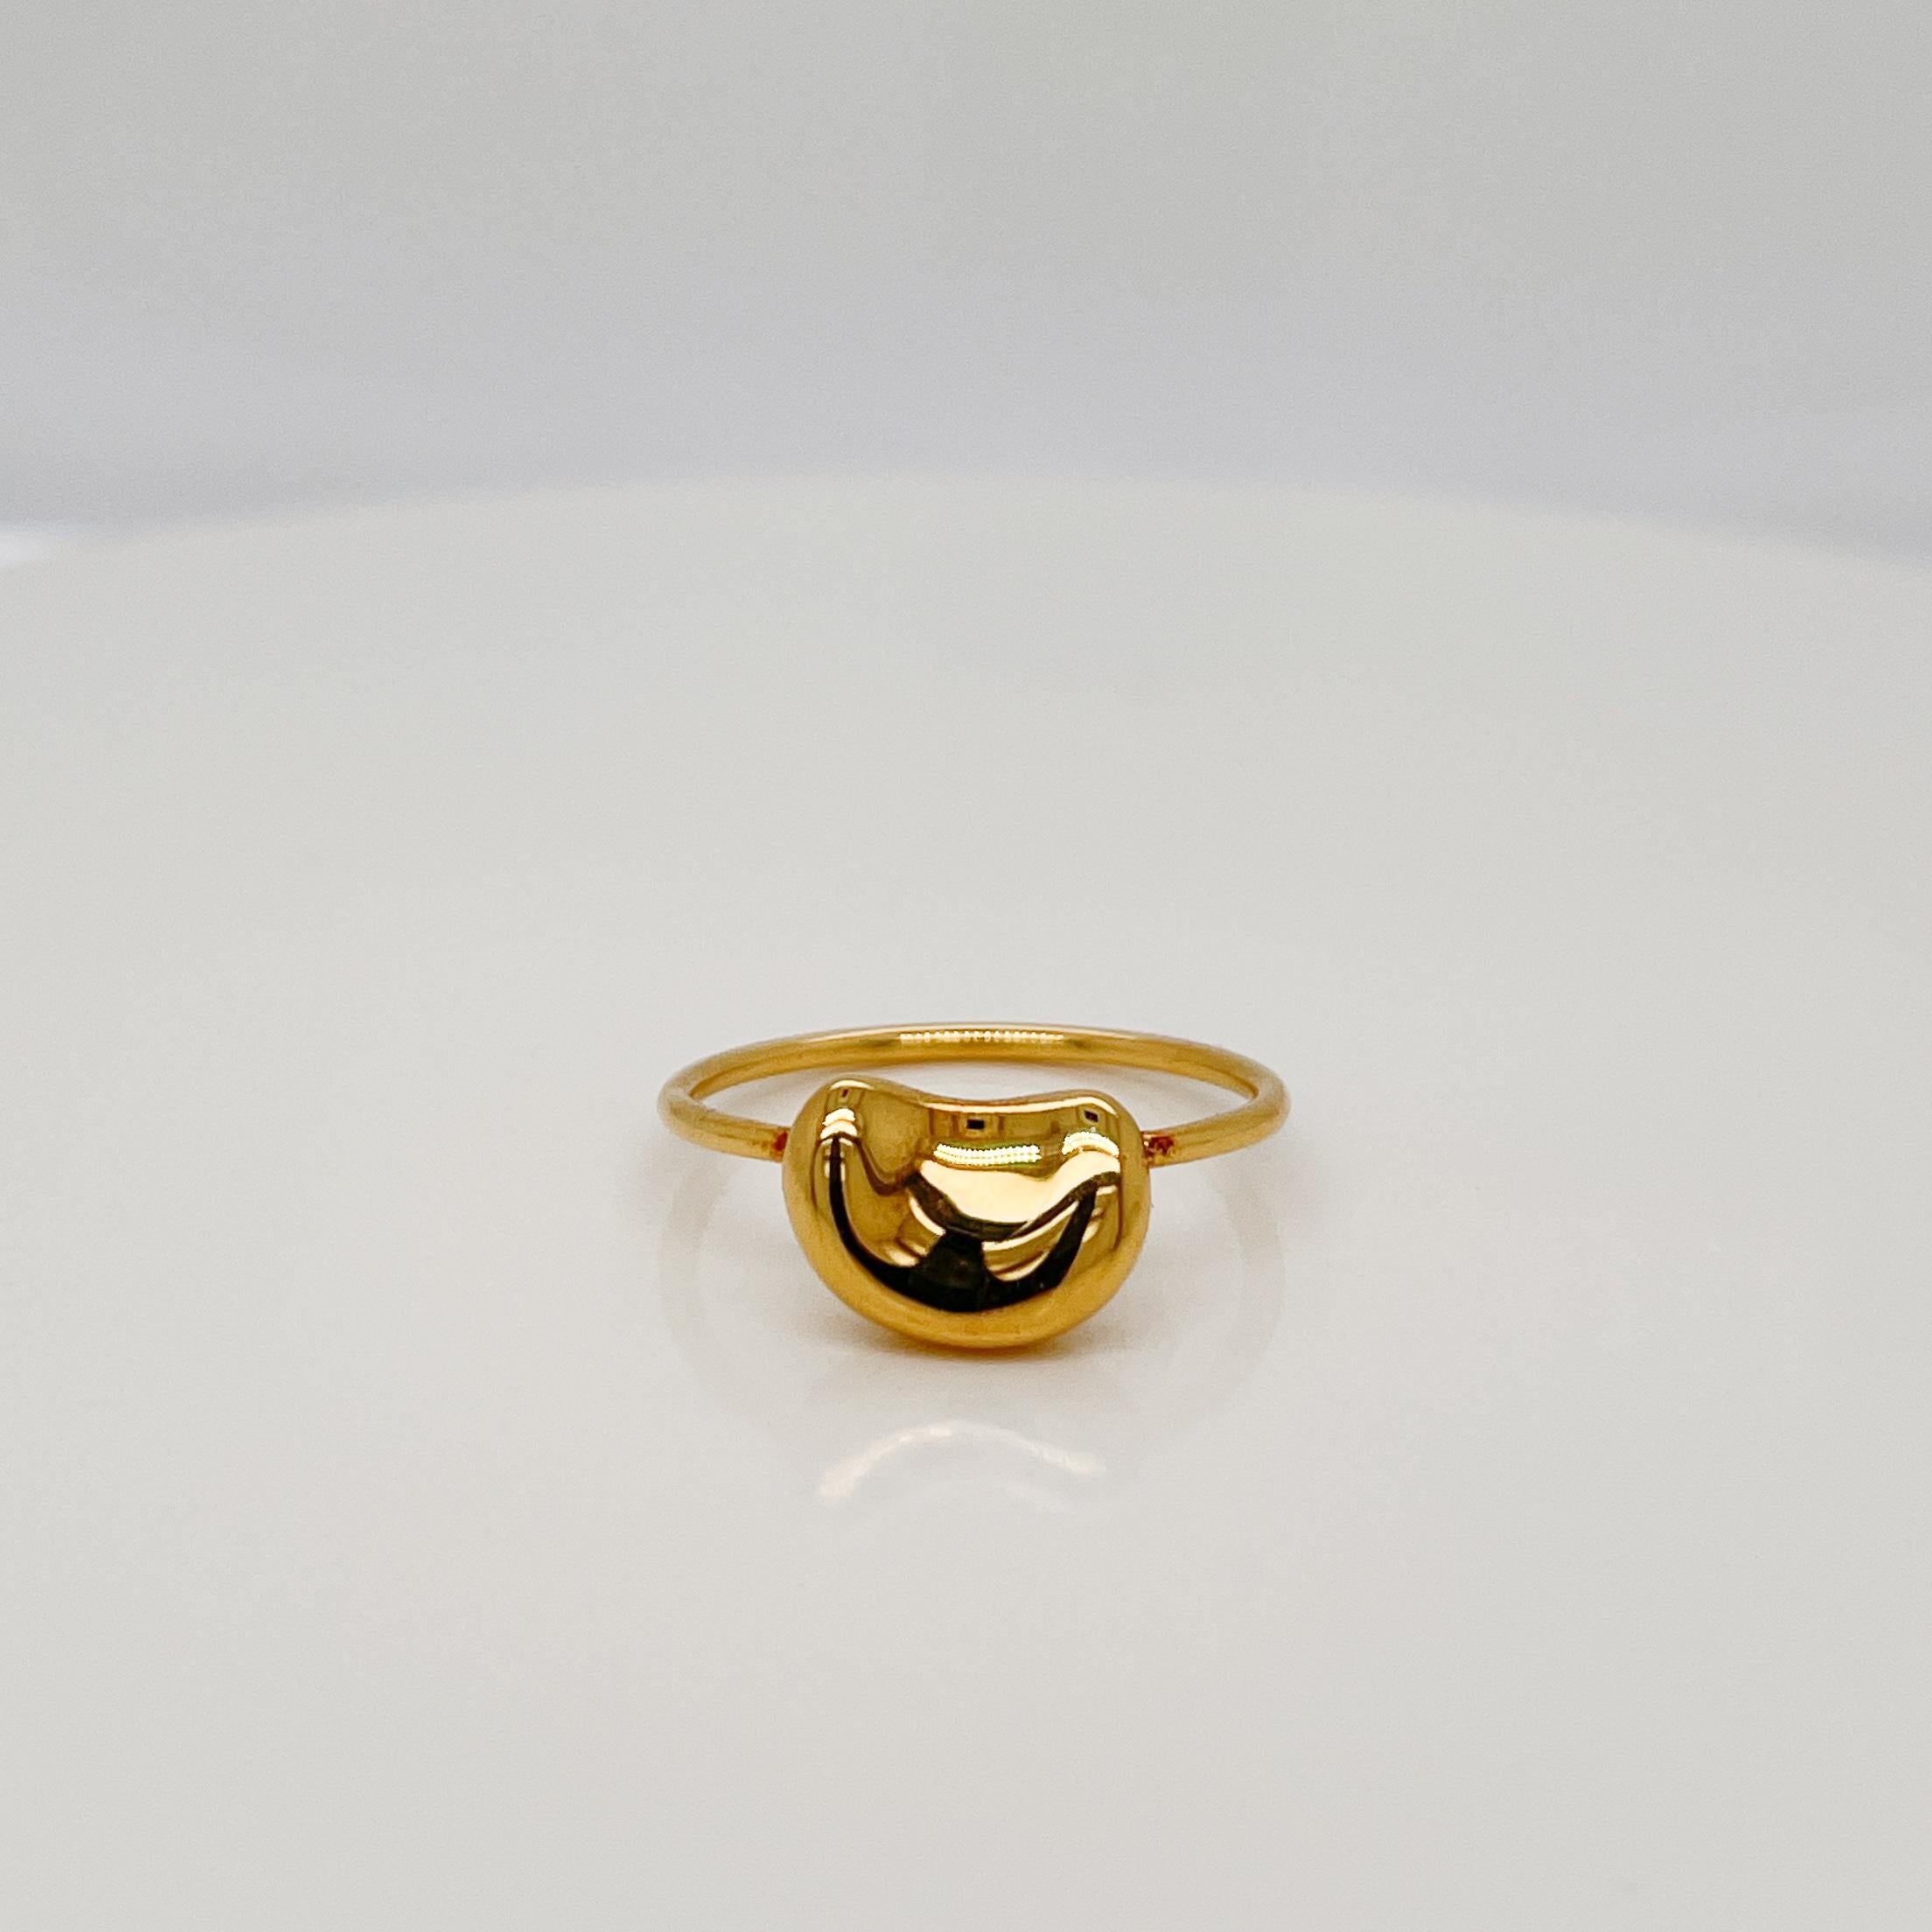 A fine Bean ring designed by Elsa Peretti.

In 18k gold.

By Tiffany & Co.

Simply a great ring by one of Tiffany's top designers!

Date:
20th Century

Overall Condition:
It is in overall good, as-pictured, used estate condition with some fine &